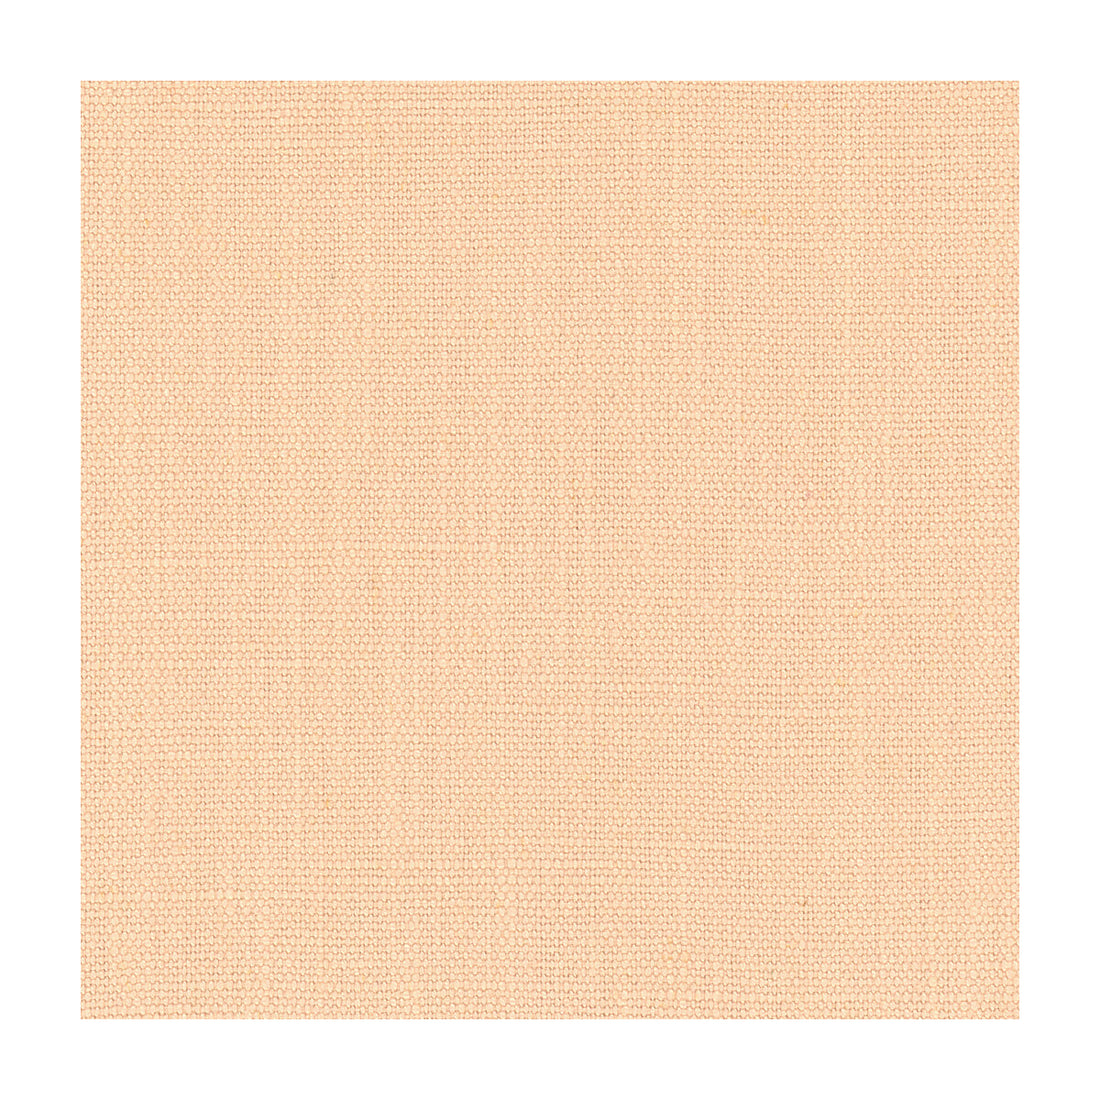 Kravet Basics fabric in 33771-17 color - pattern 33771.17.0 - by Kravet Basics in the Perfect Plains collection